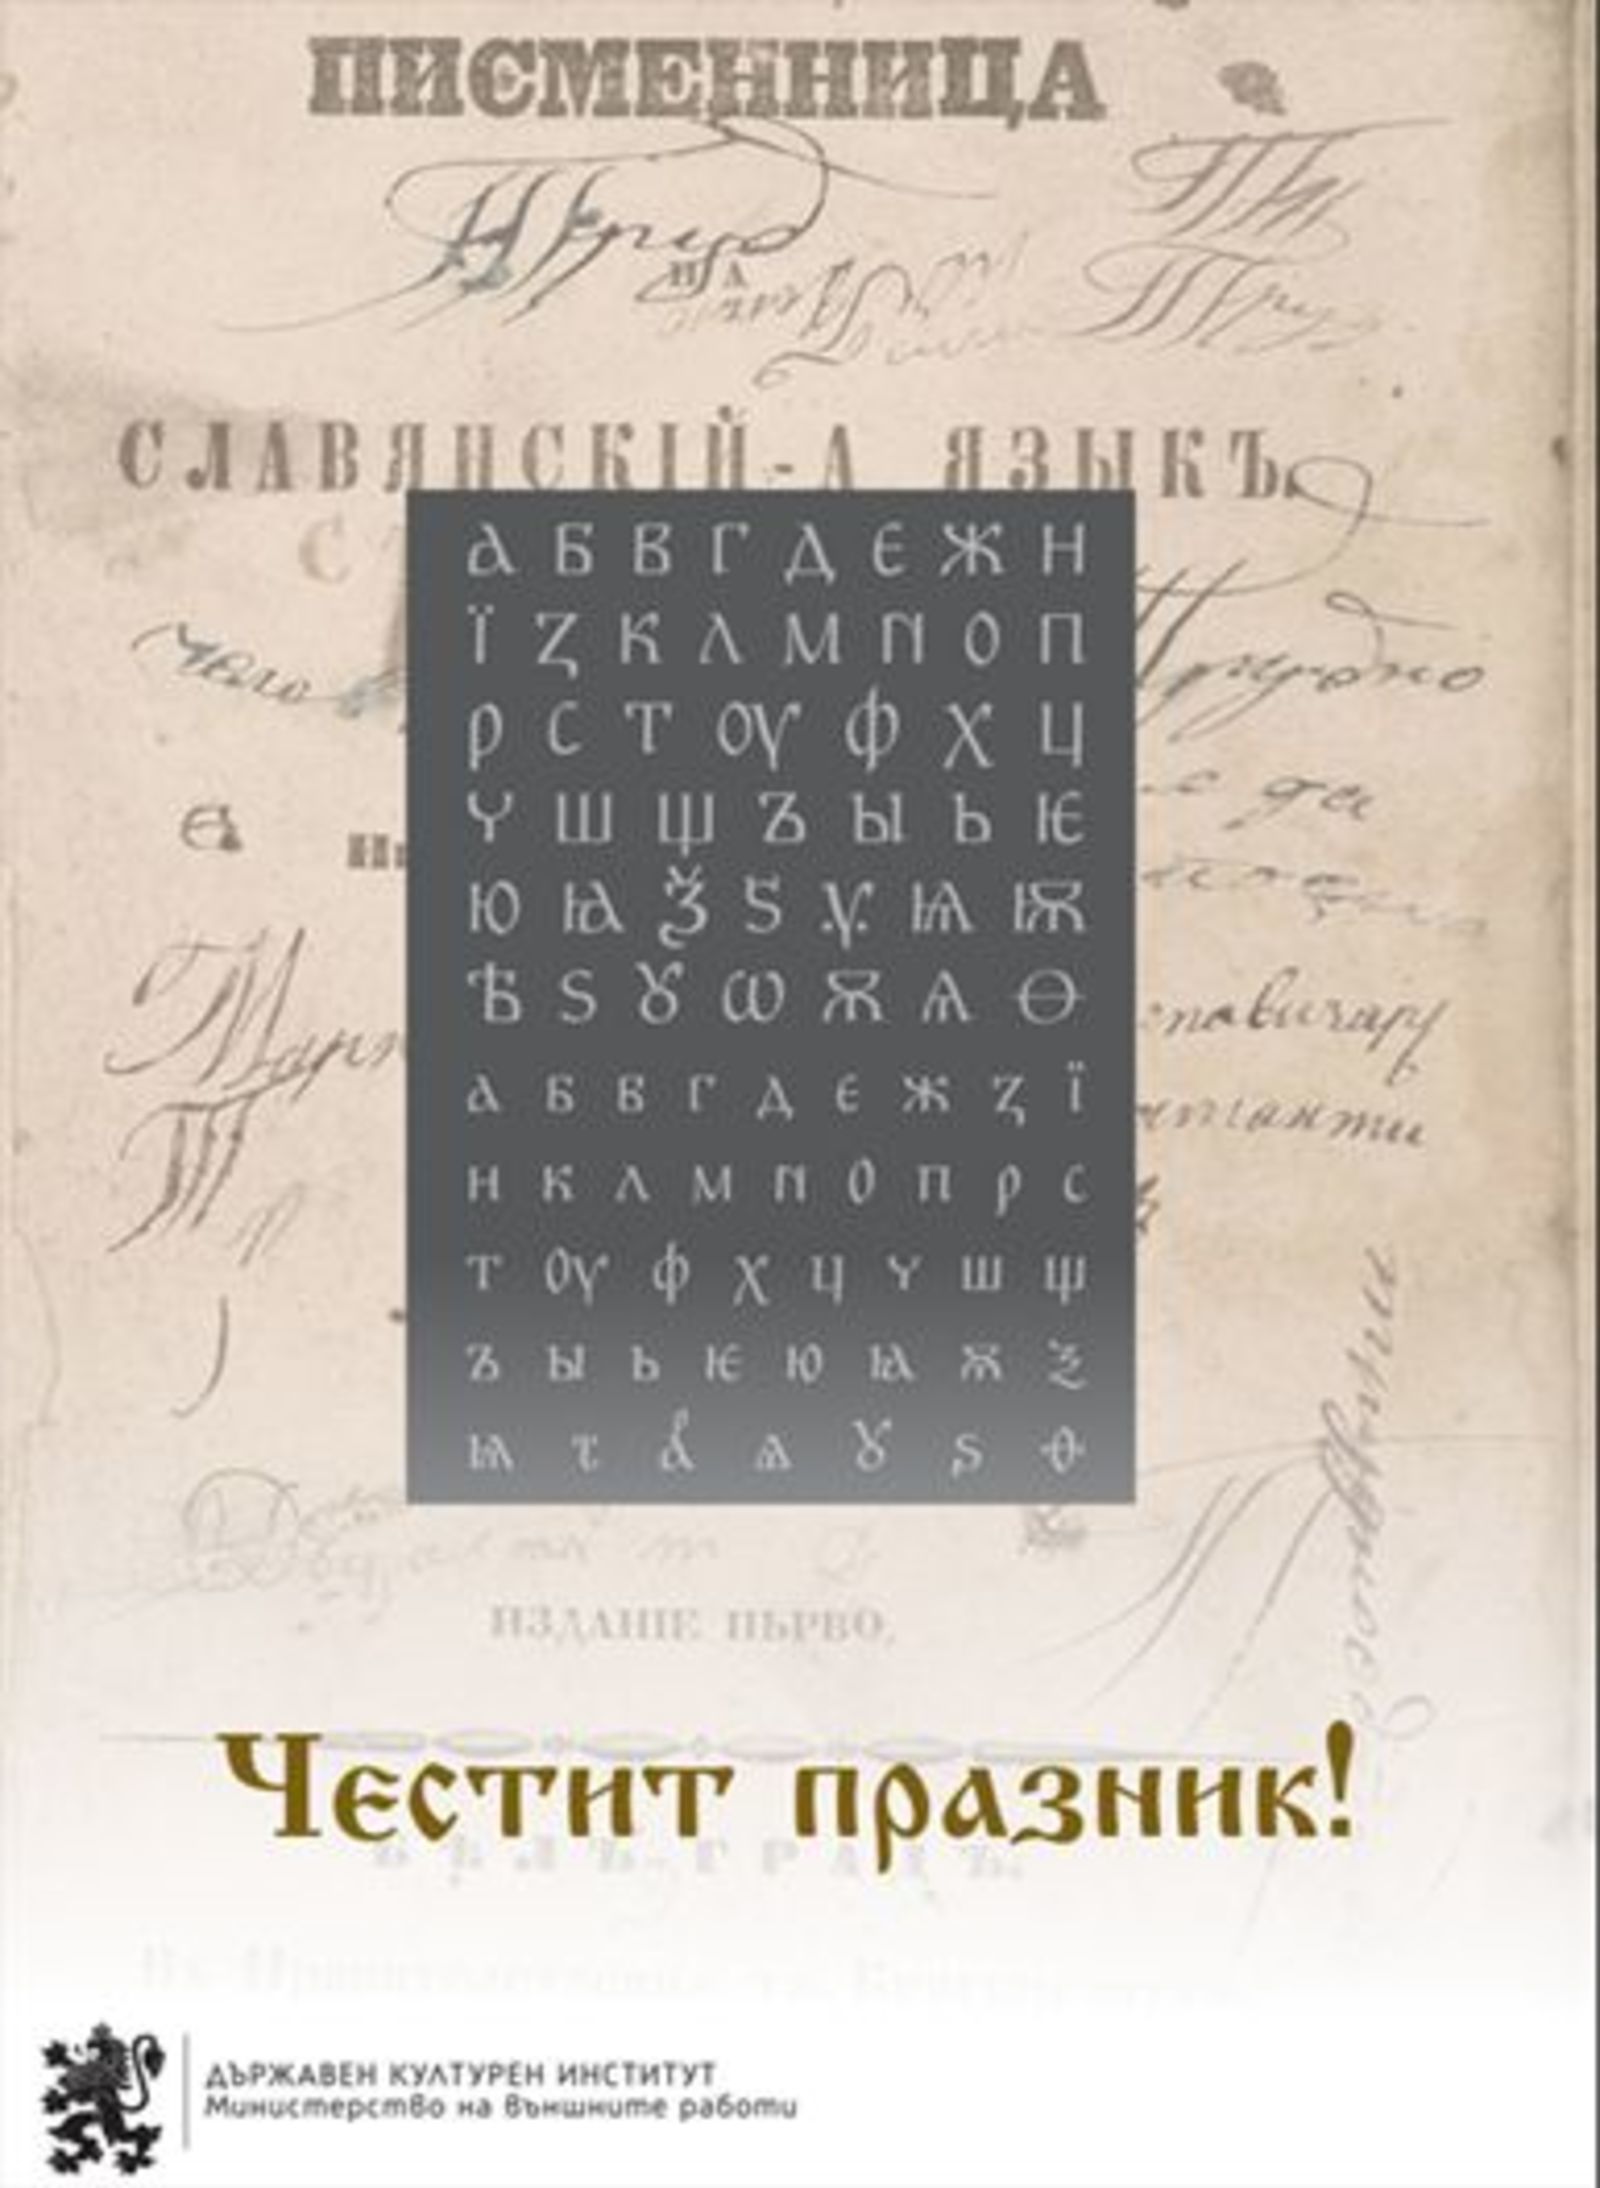 Bulgaria Celebrates the National Day of Culture and Slavic Script